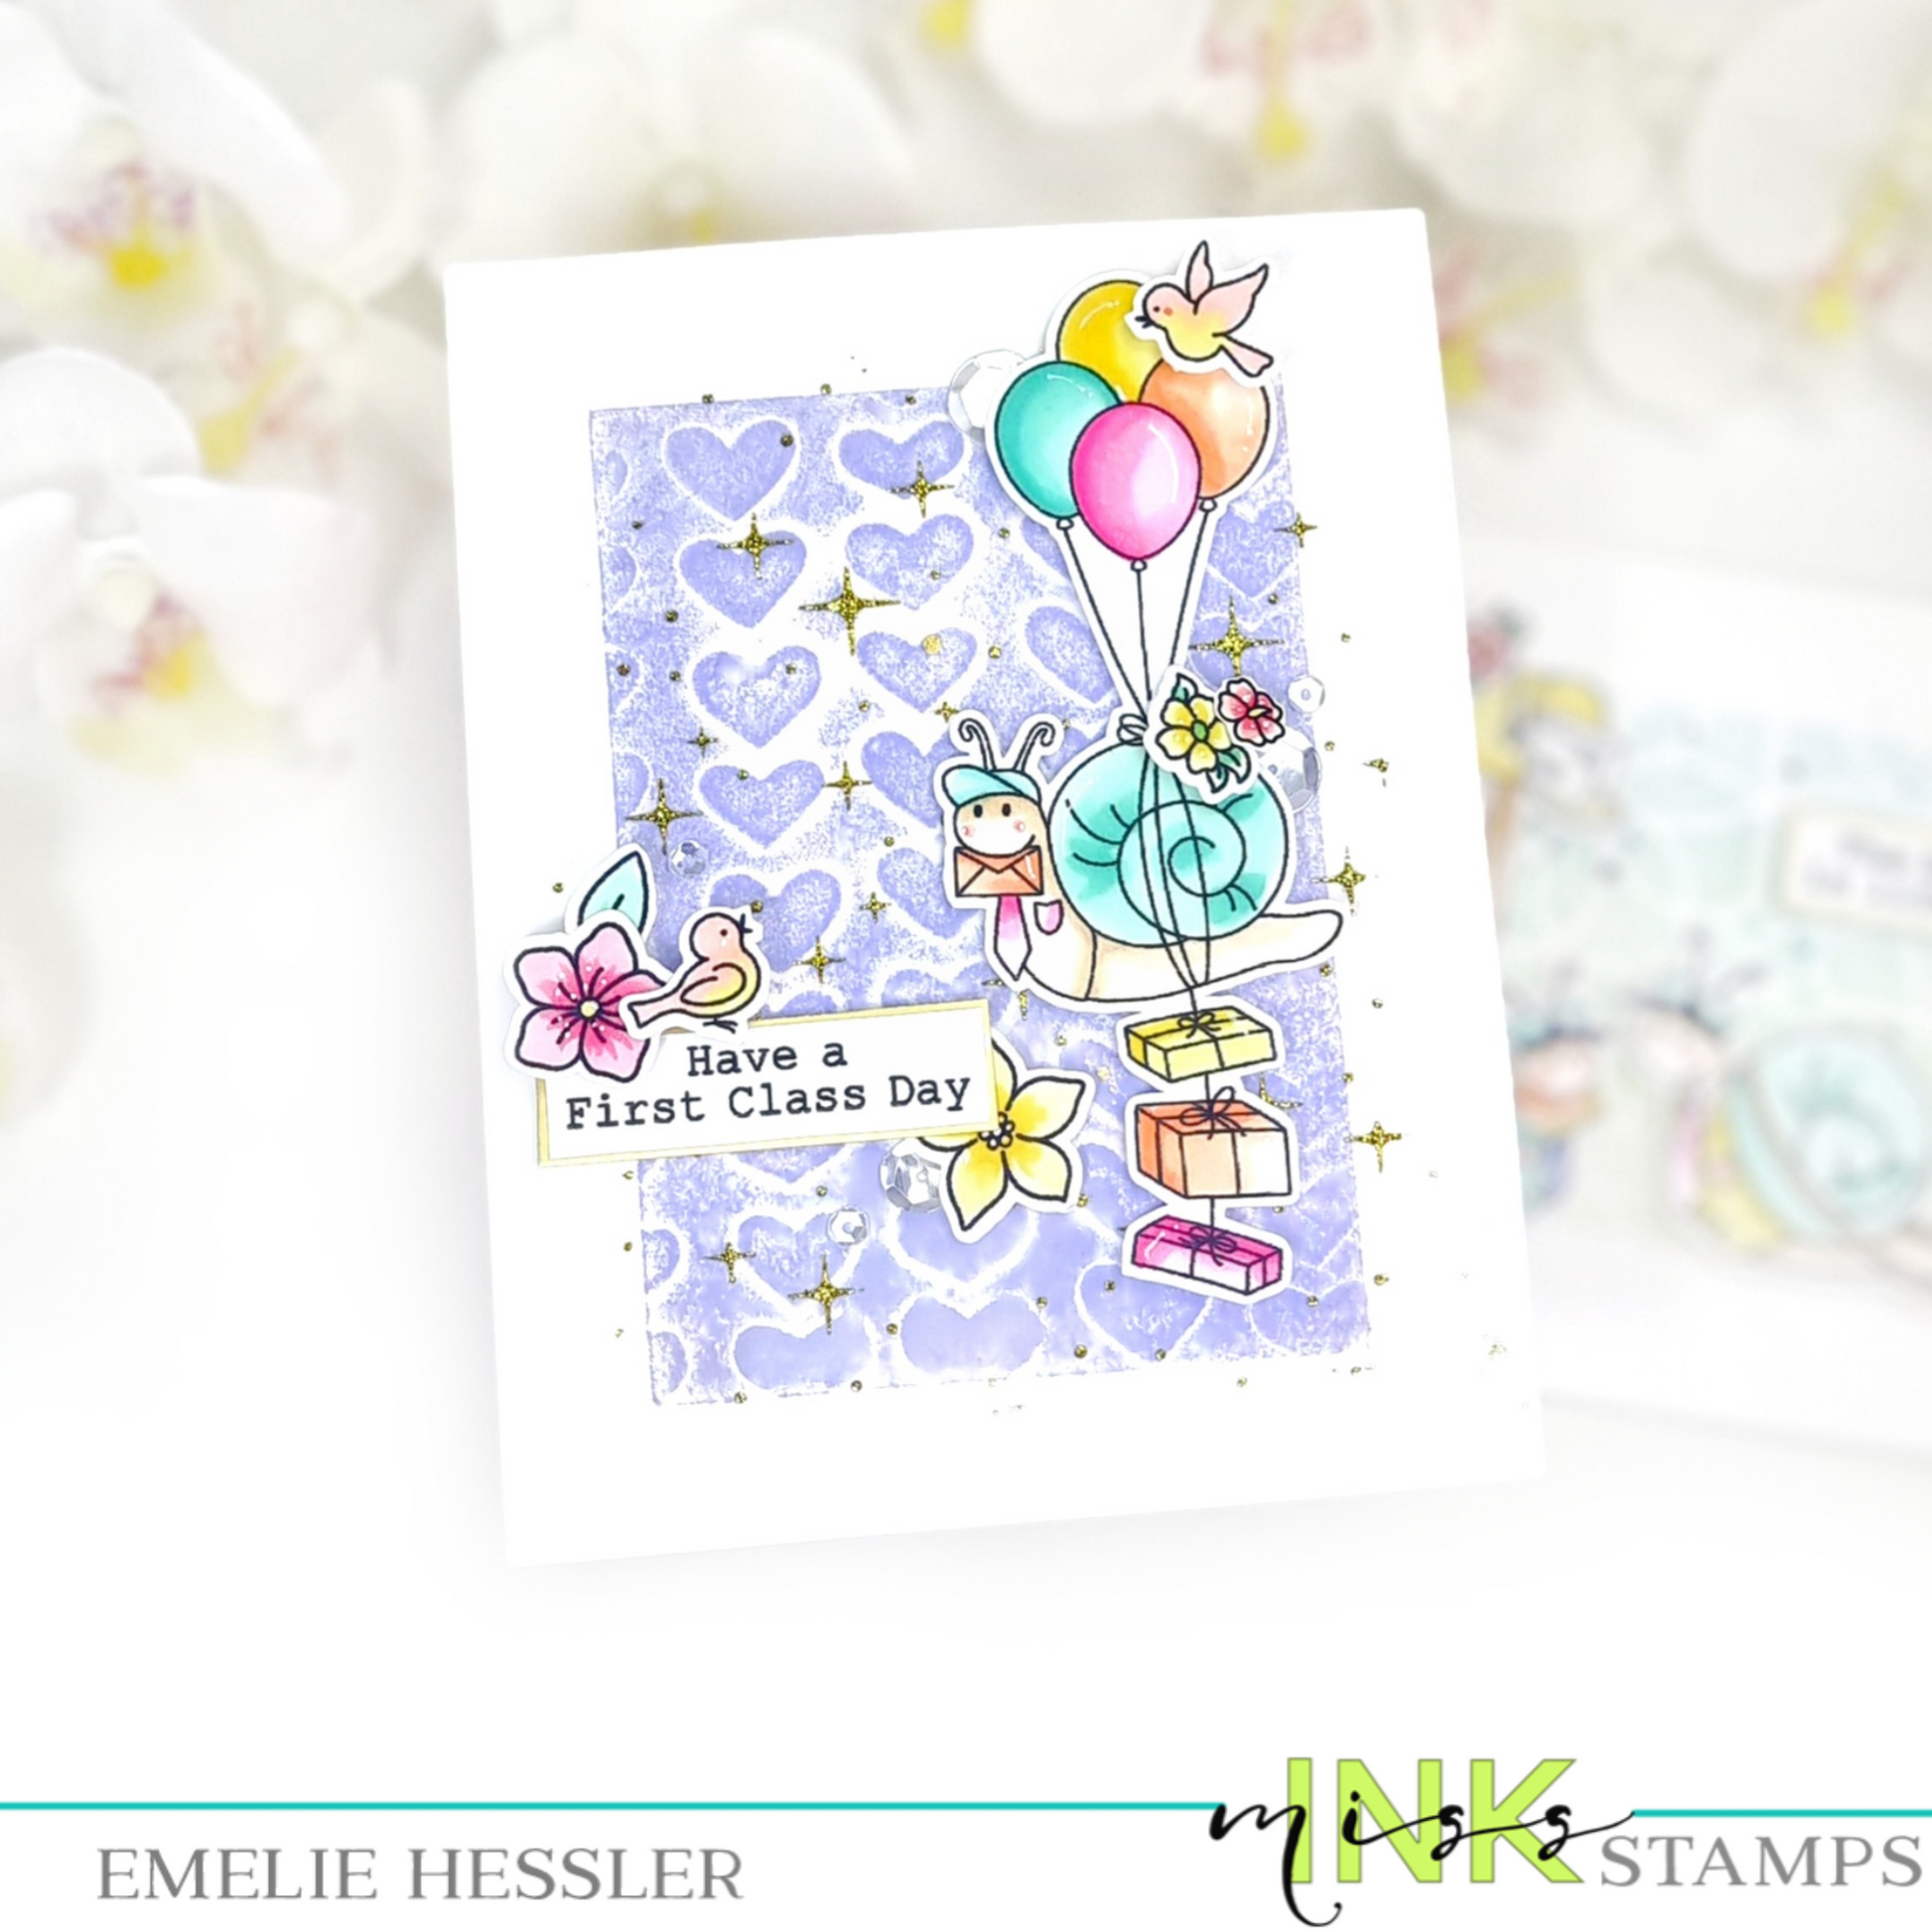 Flower-Snail Stamps